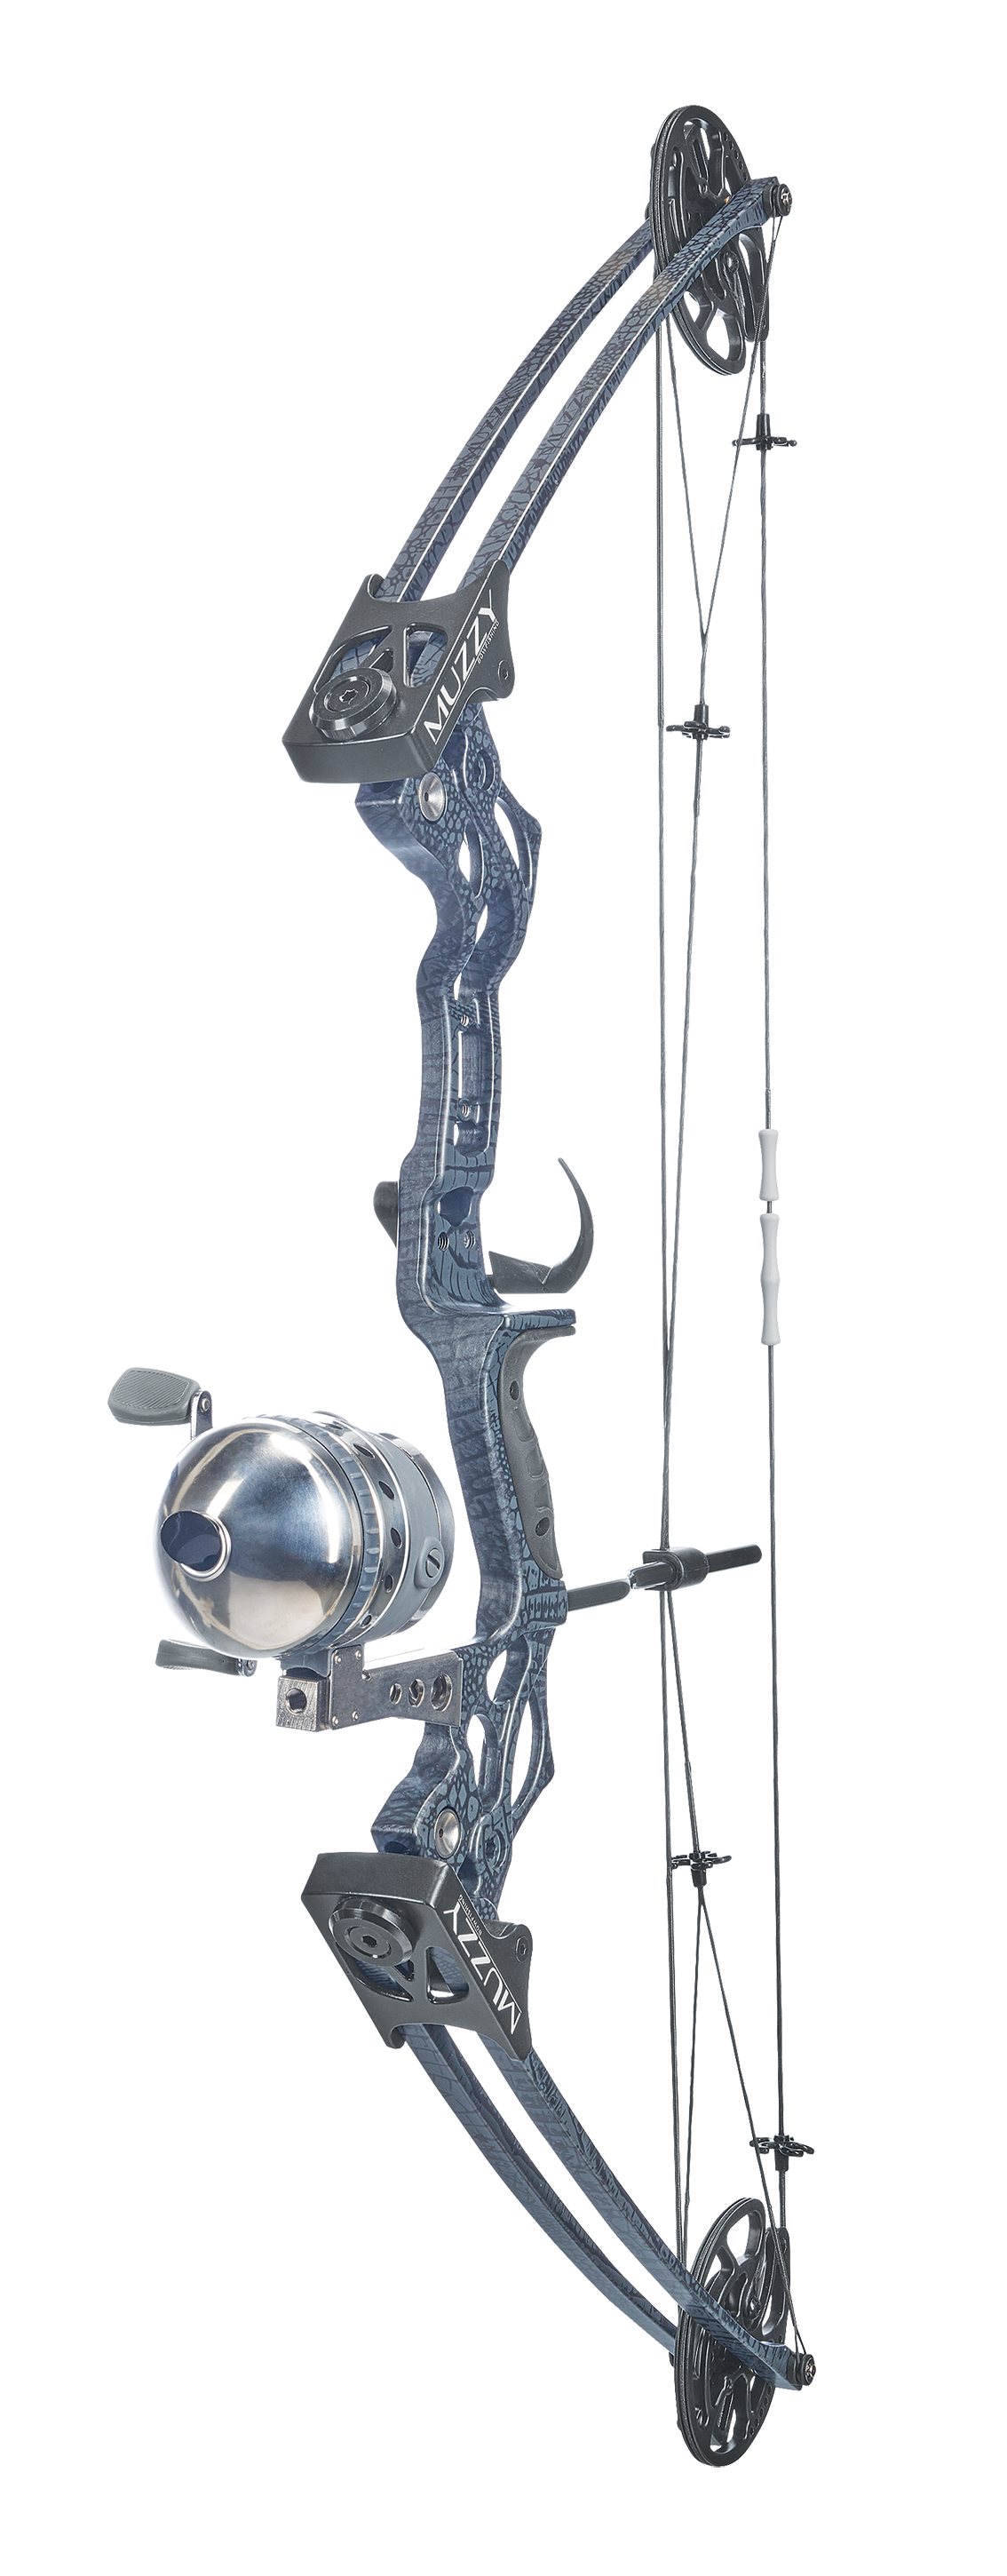 Muzzy Bowfishing V2 Adjustable Compound BOW System - RH 7920 - Archery  Supplies at  : 1019717298